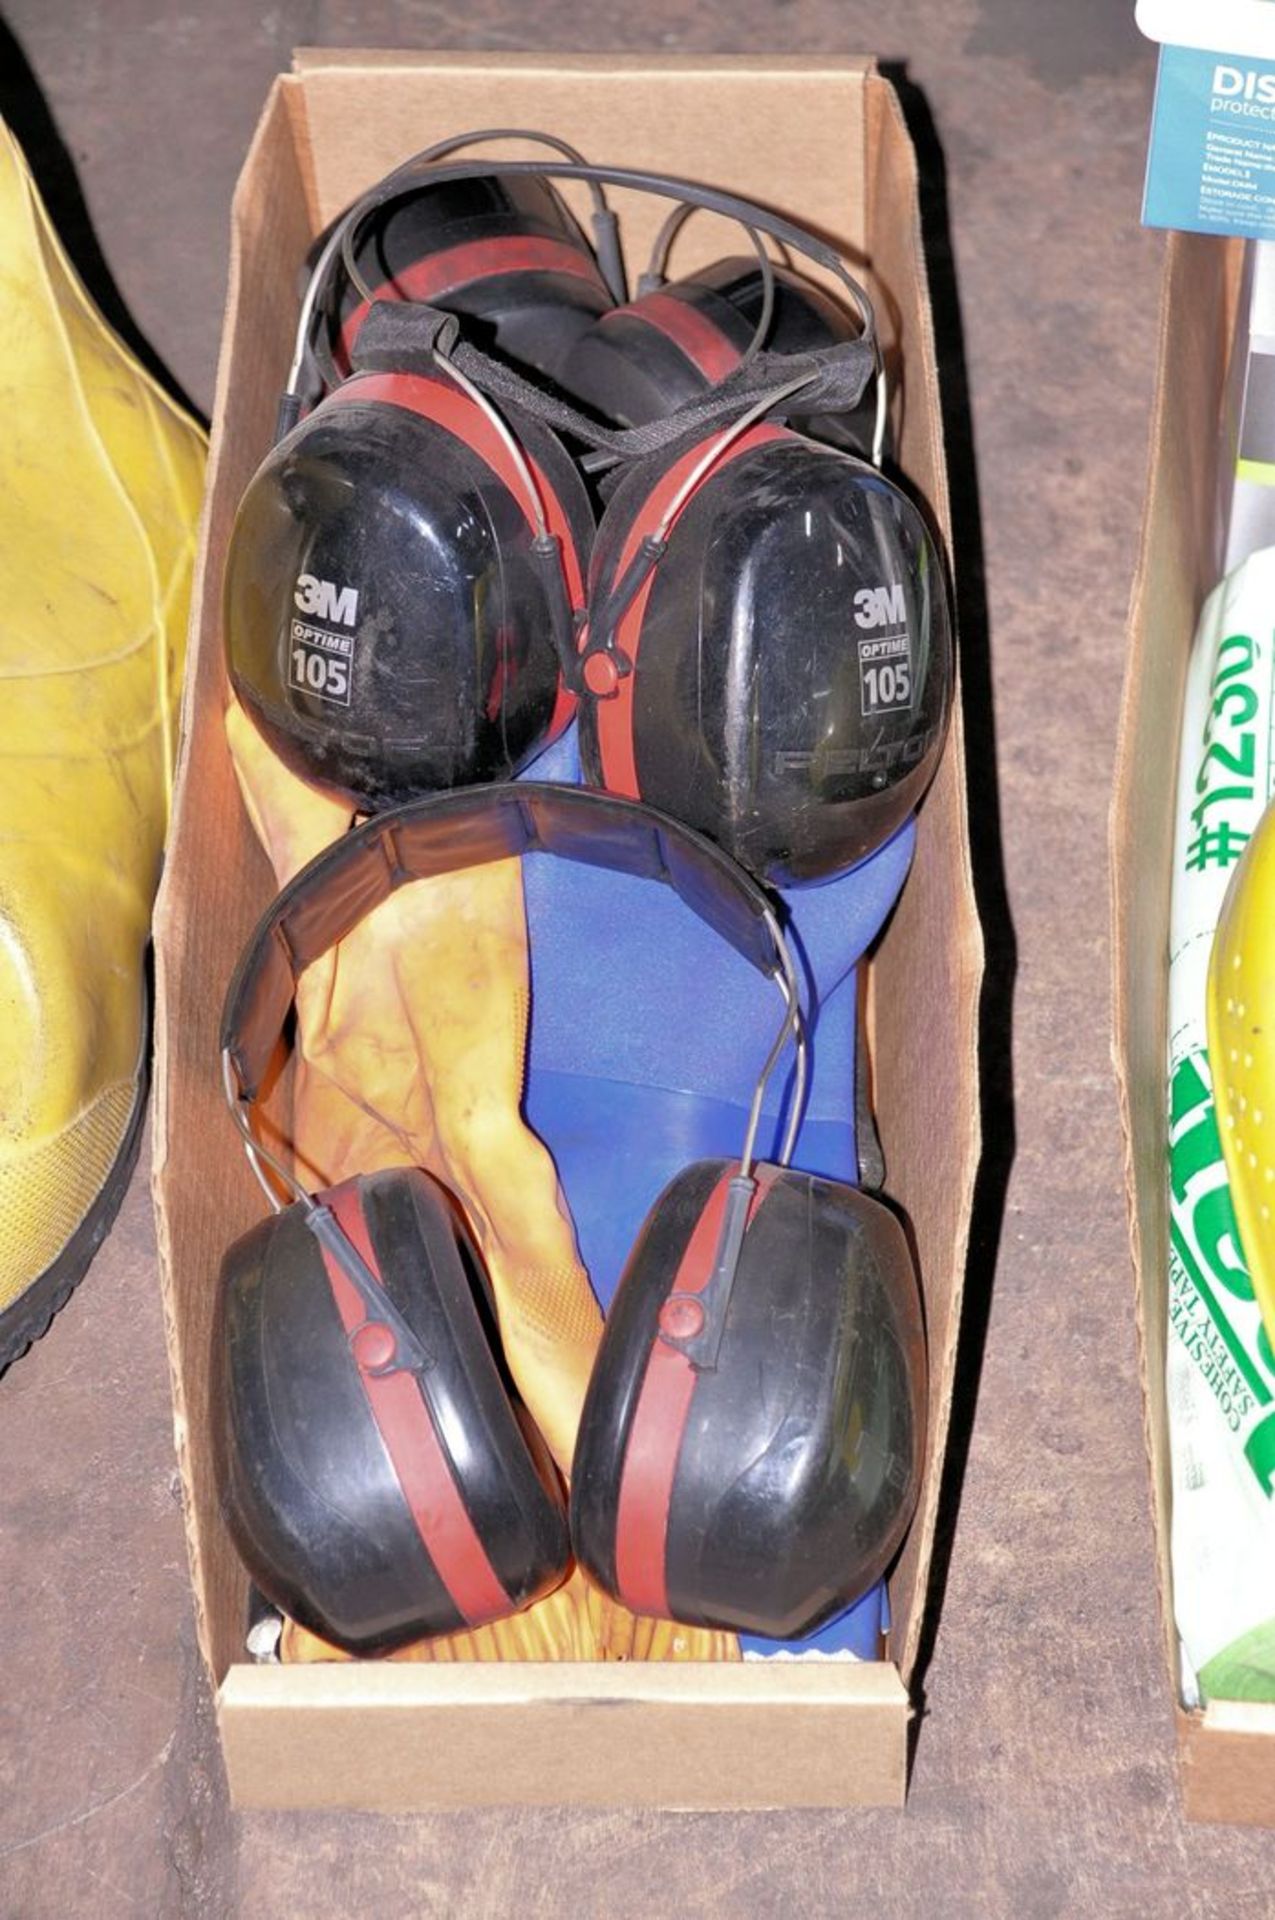 Lot - Safety Glasses, Safety Helmets, Hard Hats, Ear Muffs and Medical Masks in (3) Boxes with Water - Image 3 of 4